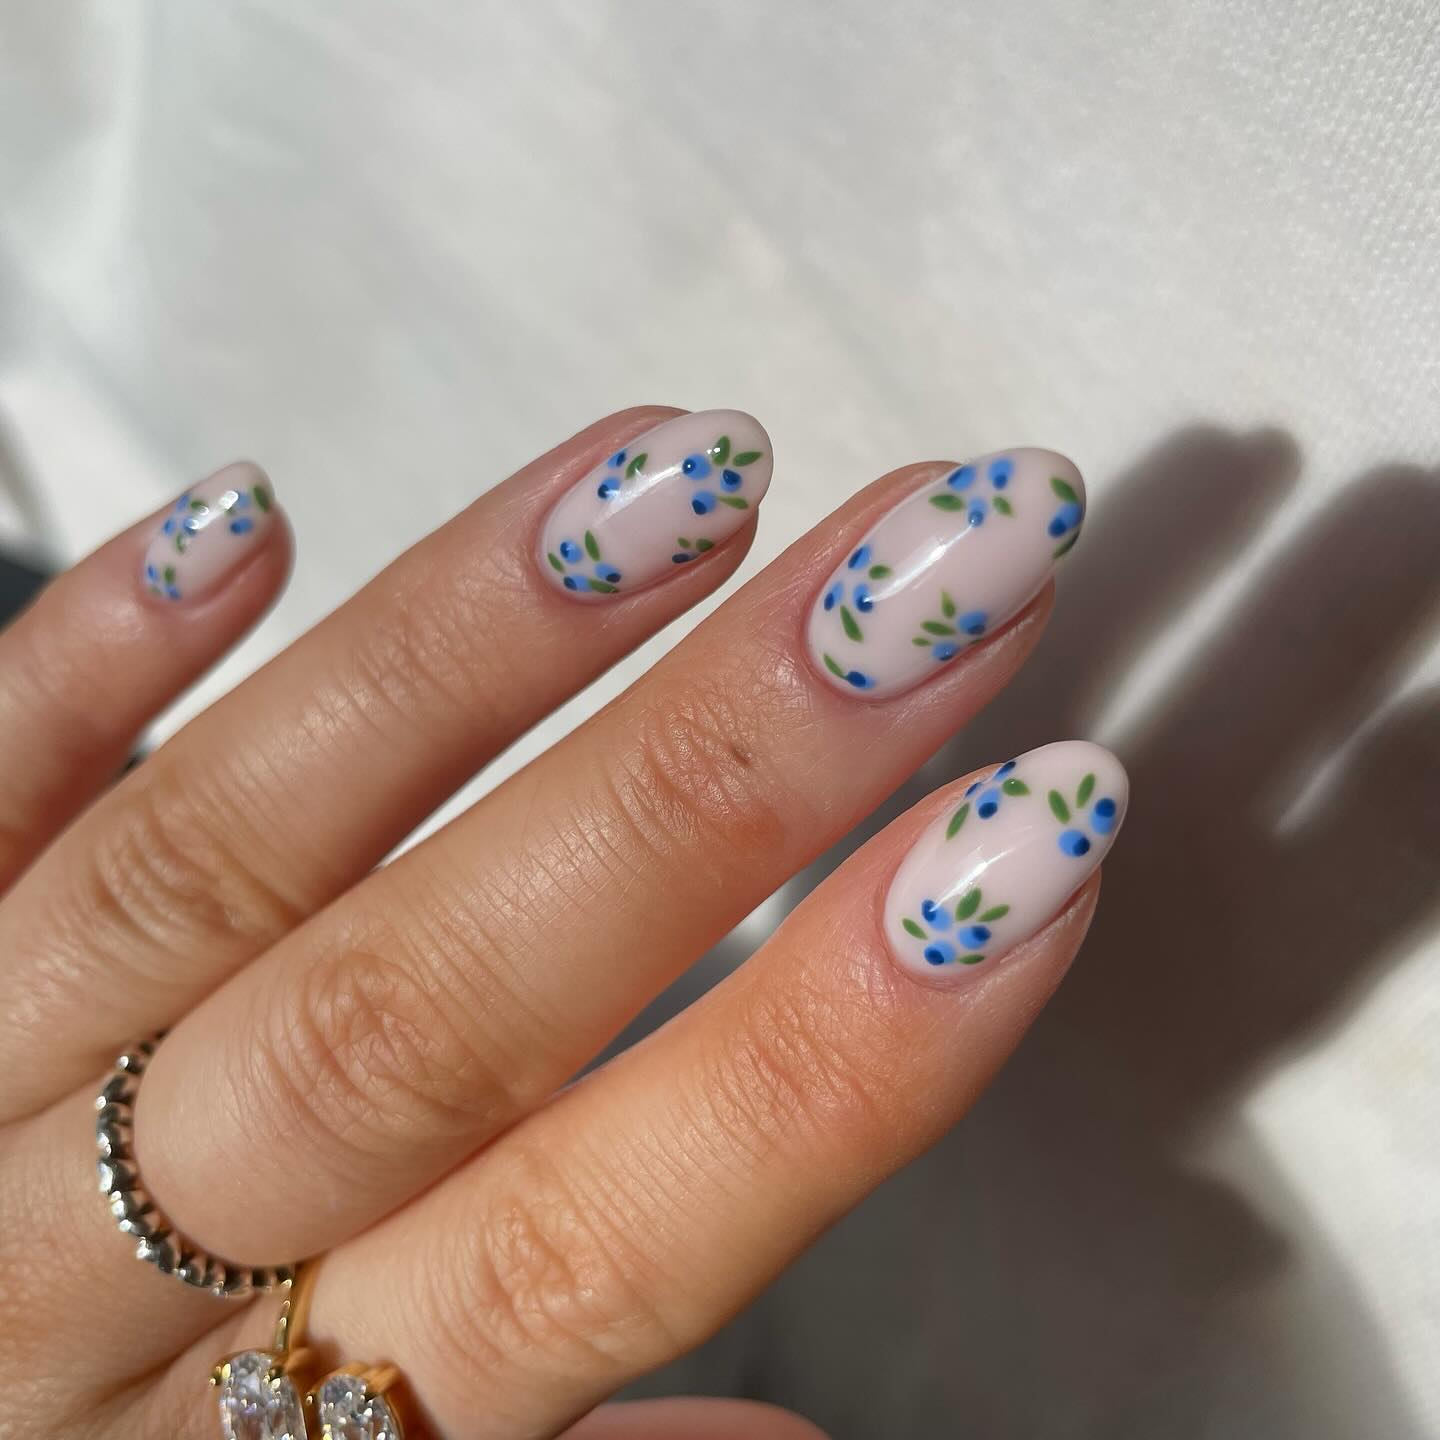 100+ Short Nail Designs You’ll Want To Try This Year images 61